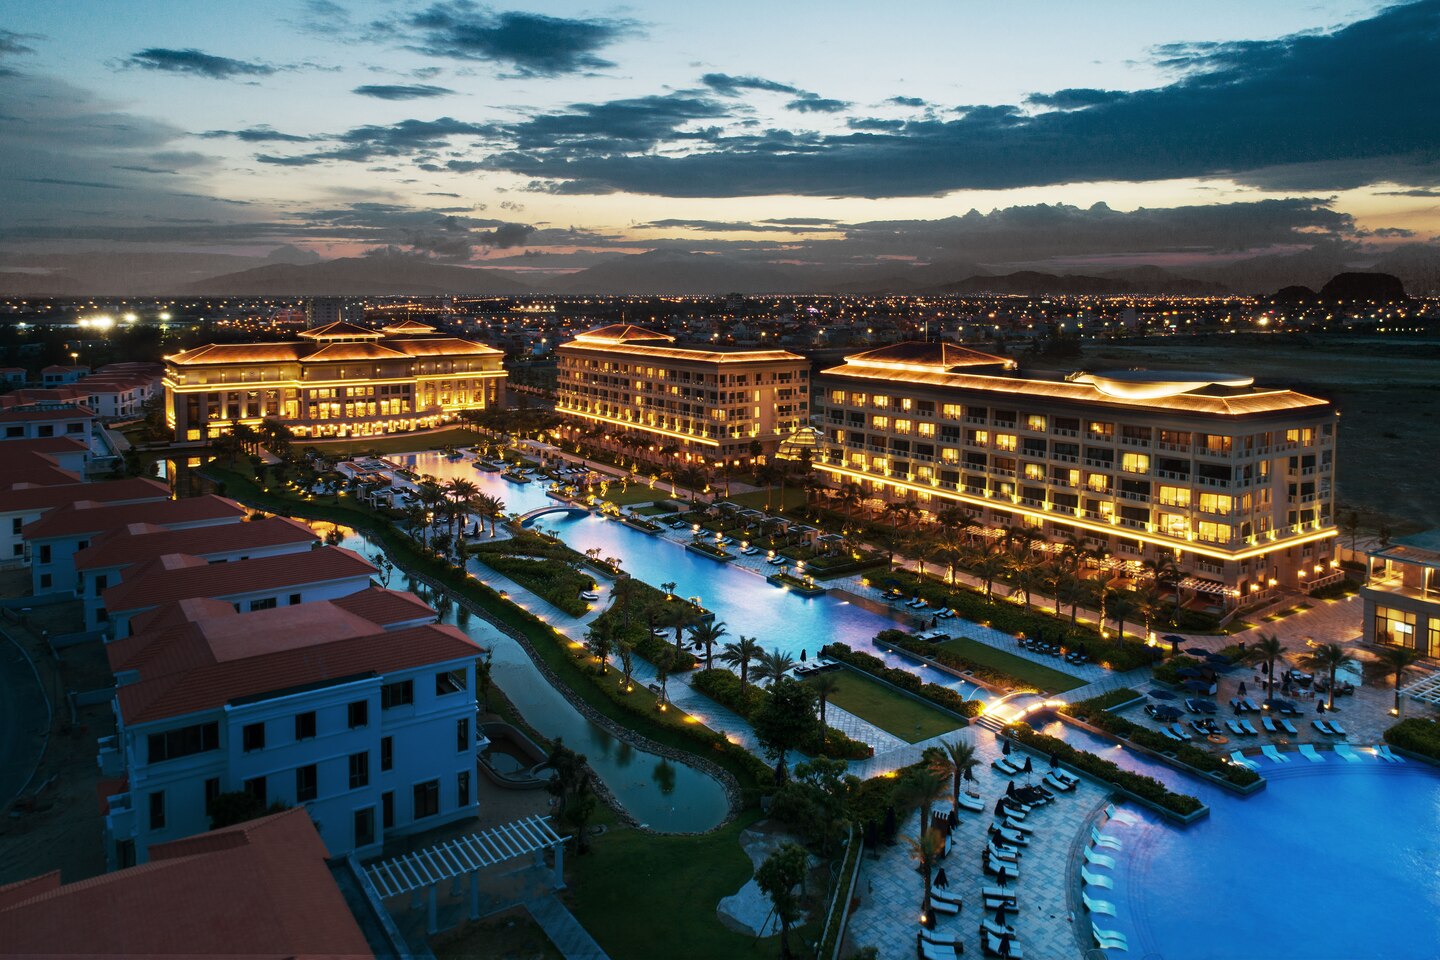 A spectacular night-time view of the Sheraton Grand Danang Resort